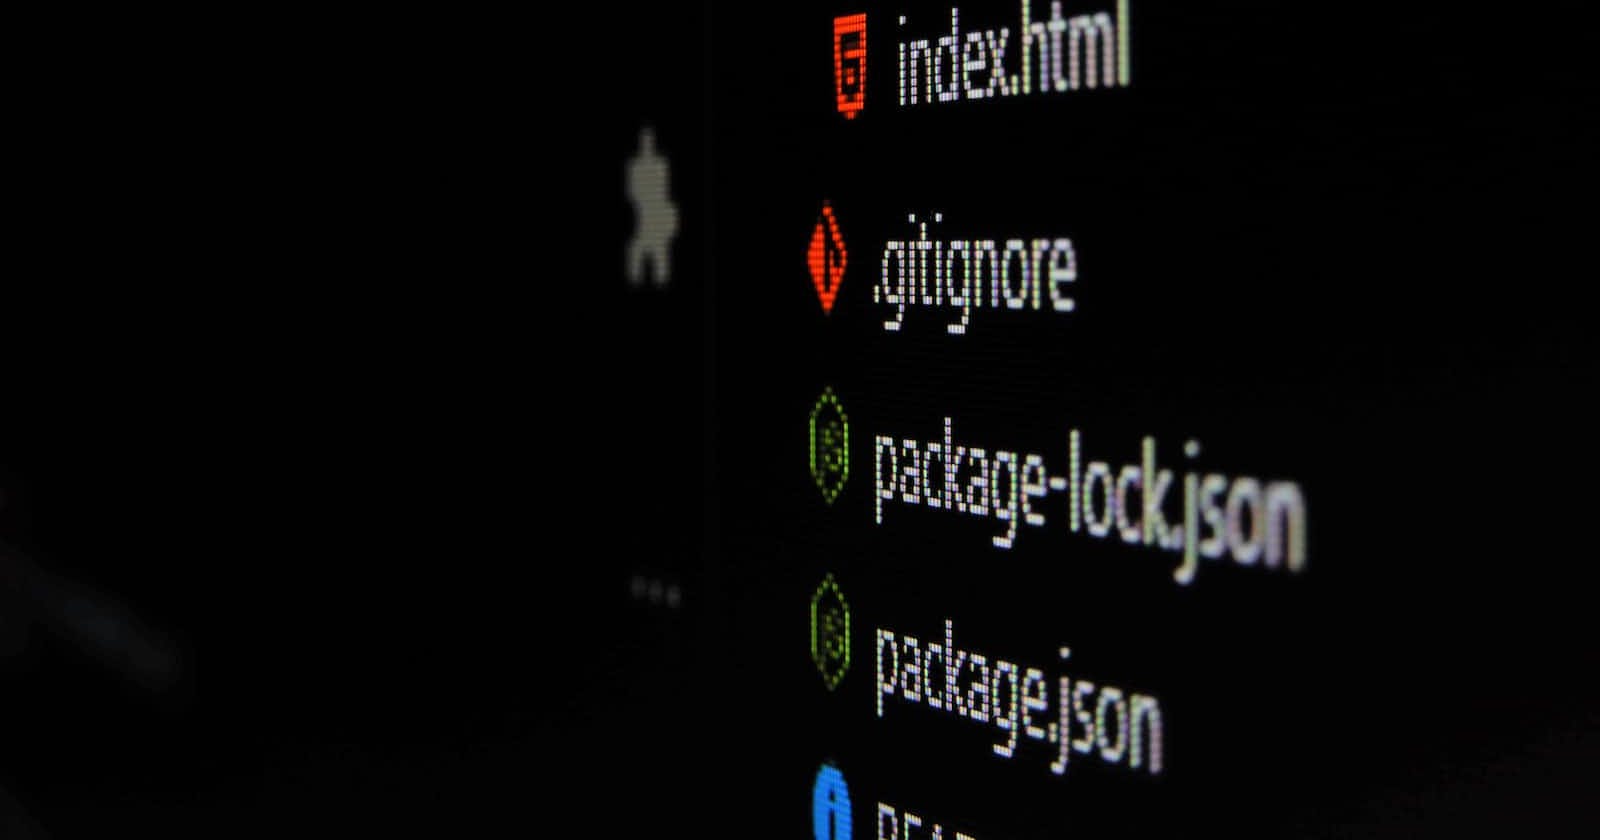 Git Basics: Git Commands and How to Use Them